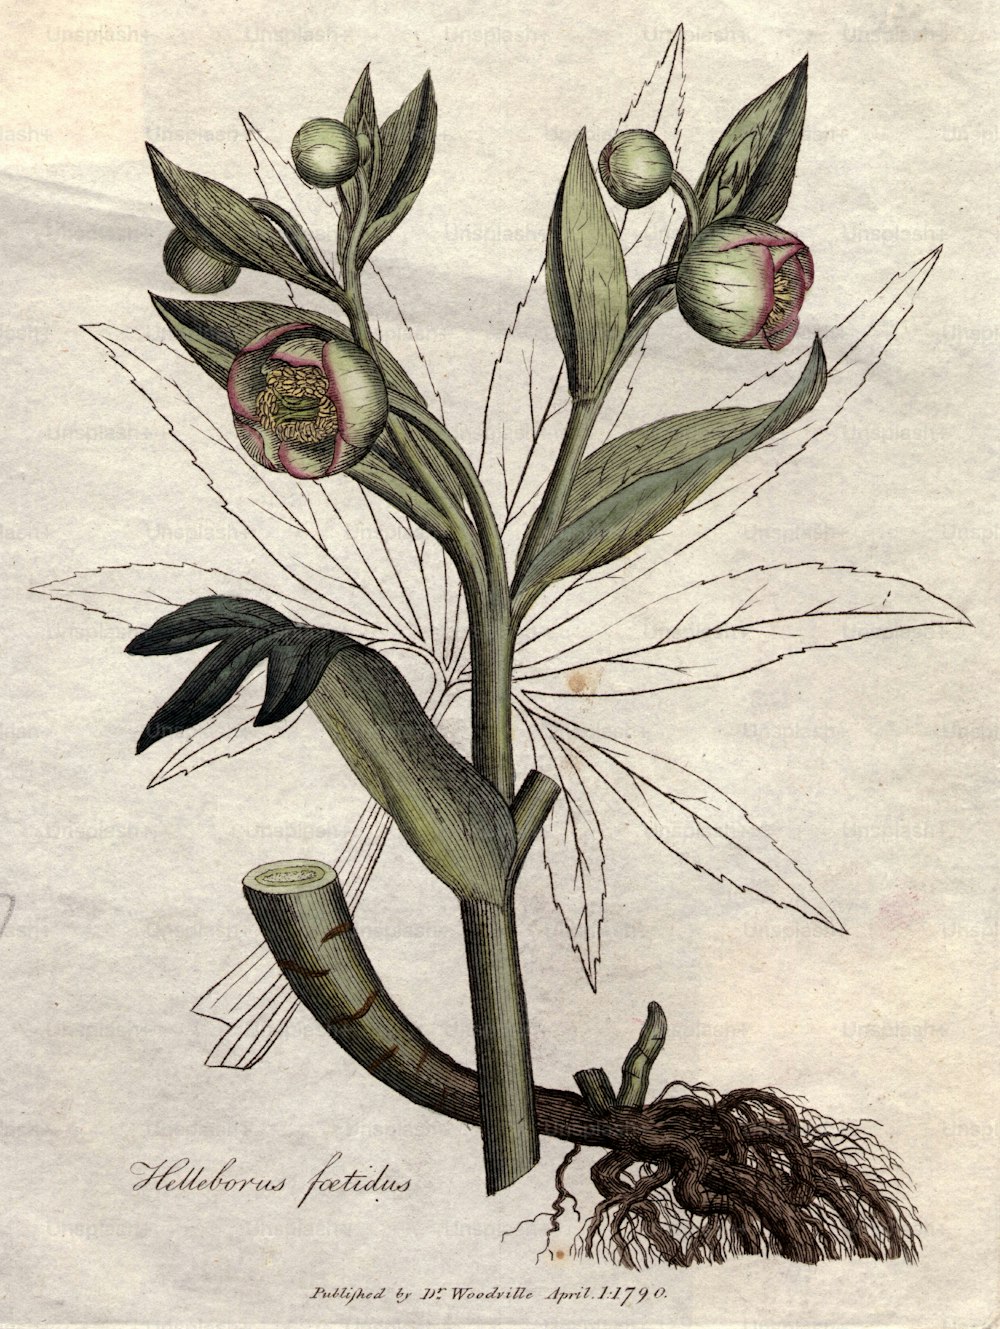 April 1790:  Helleborus foetidus.  Original Publication: From Woodville's Medical Botany, illustrated by James Sowerby - pub 1790 -1795  (Photo by Hulton Archive/Getty Images)